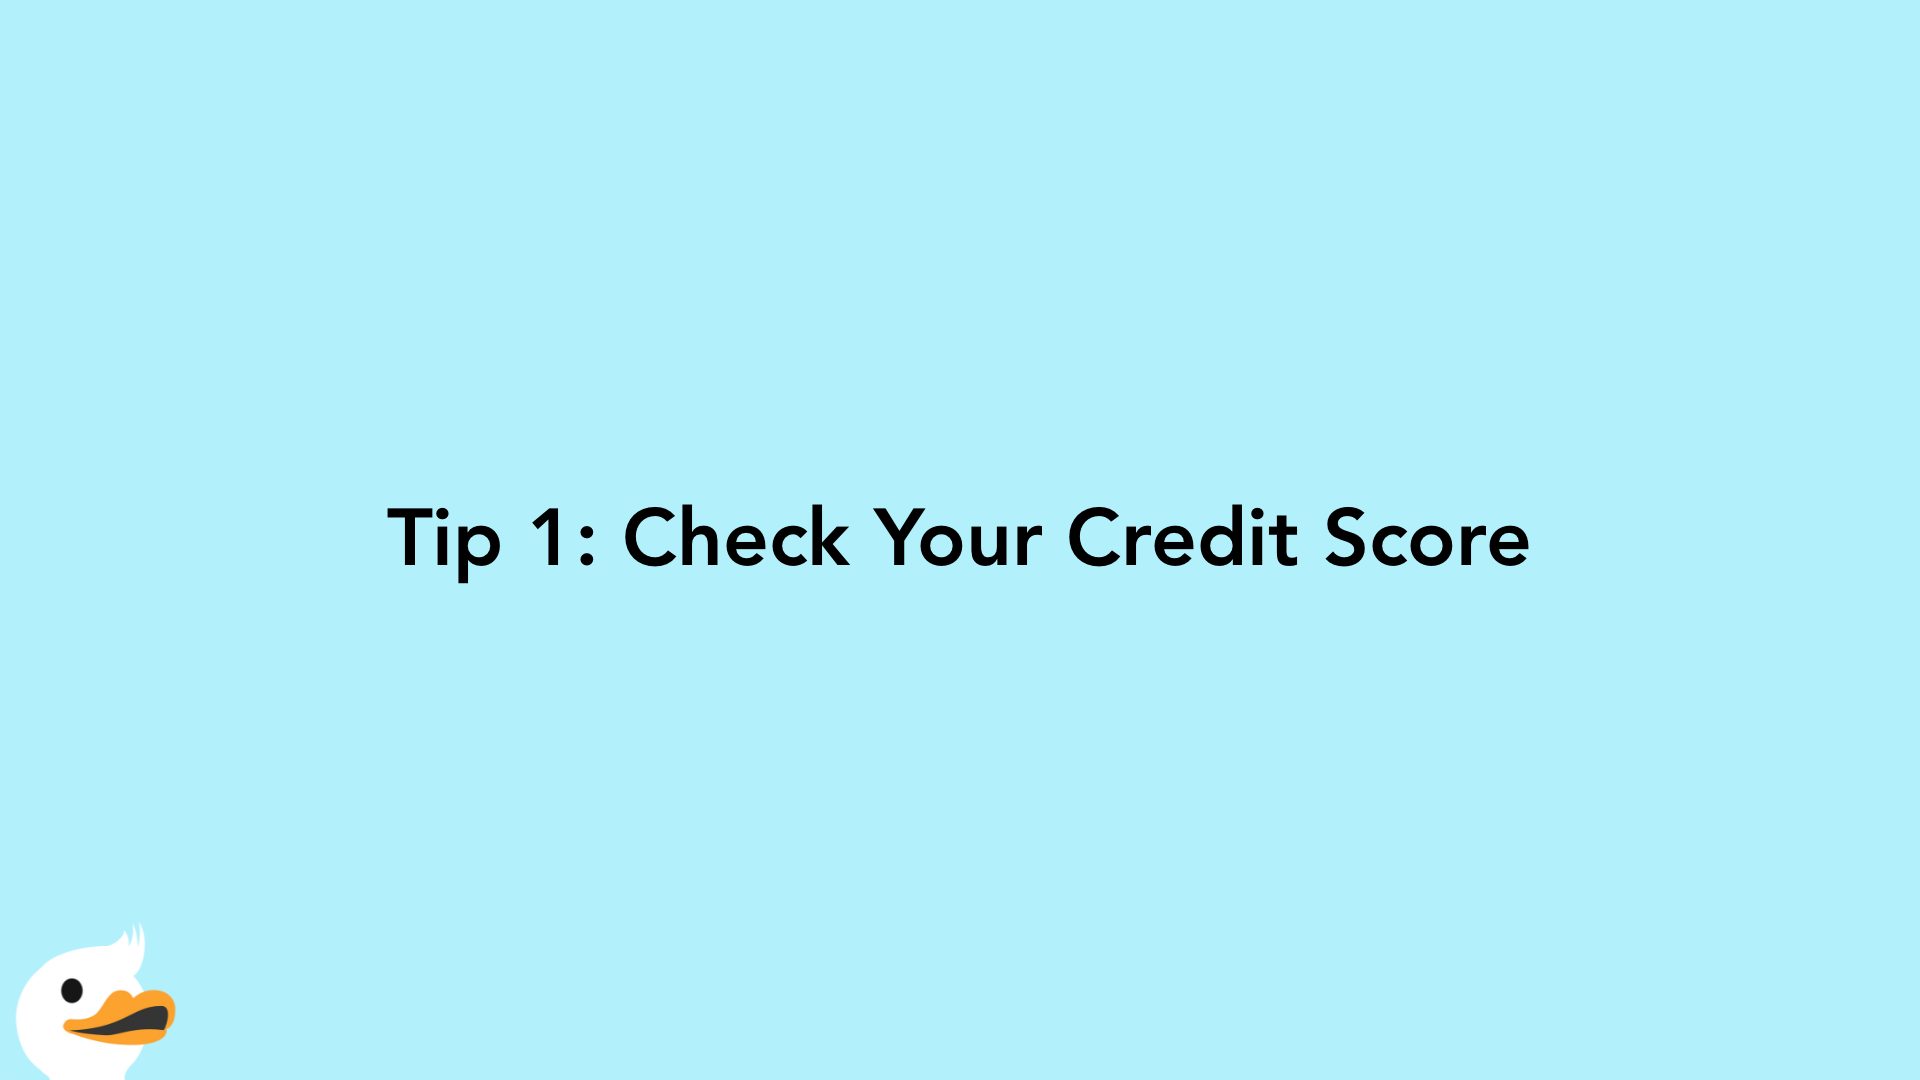 Tip 1: Check Your Credit Score